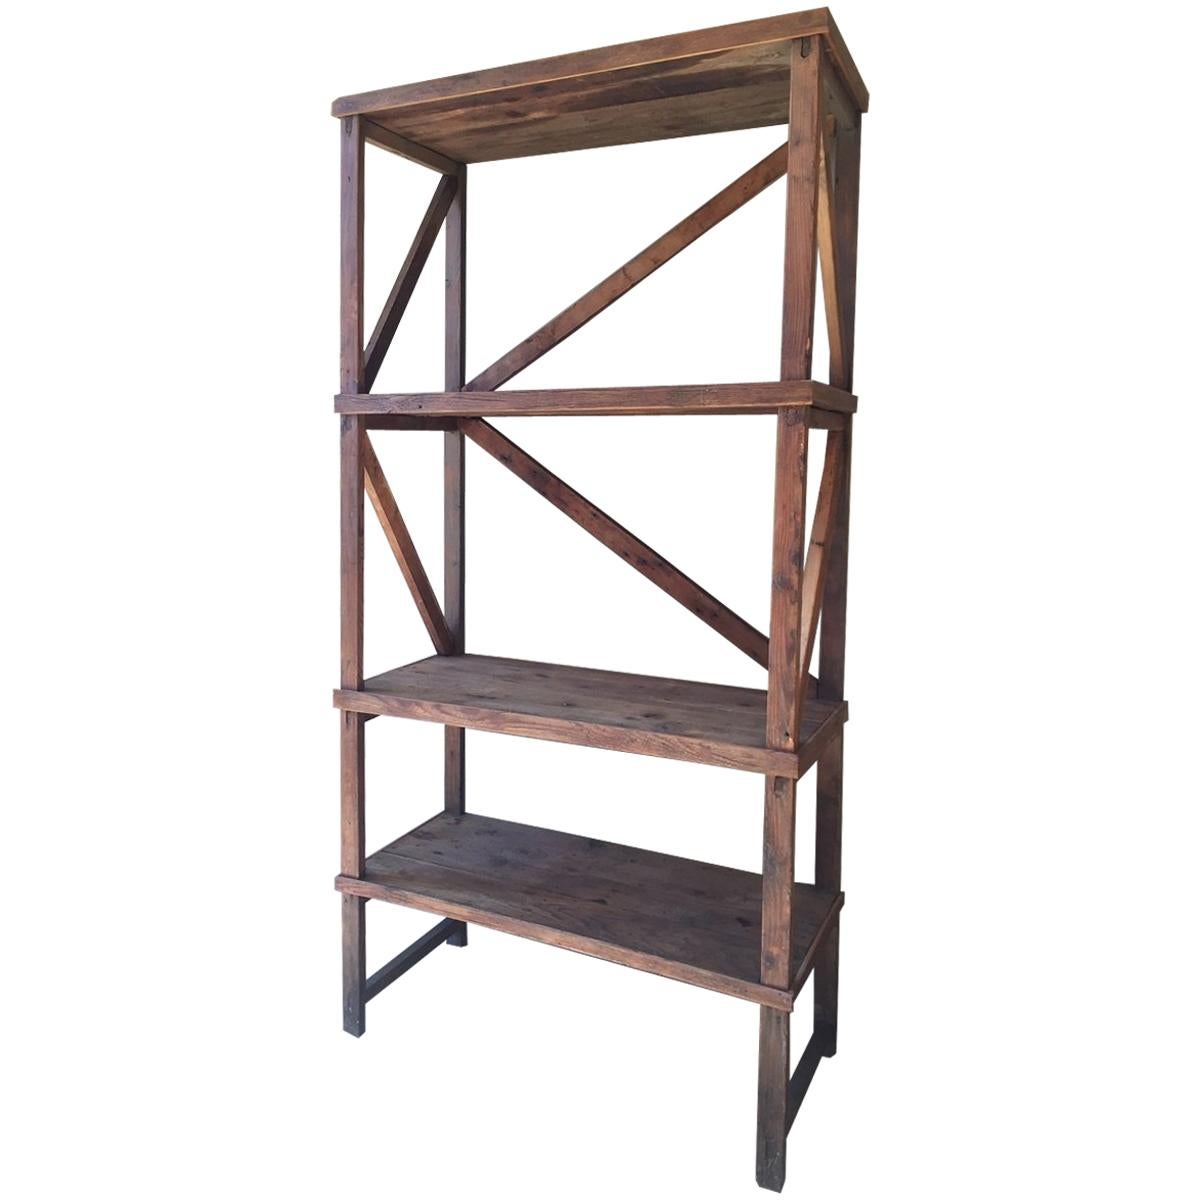 Early 20th Century Wooden Shelf Unit Industrial For Sale